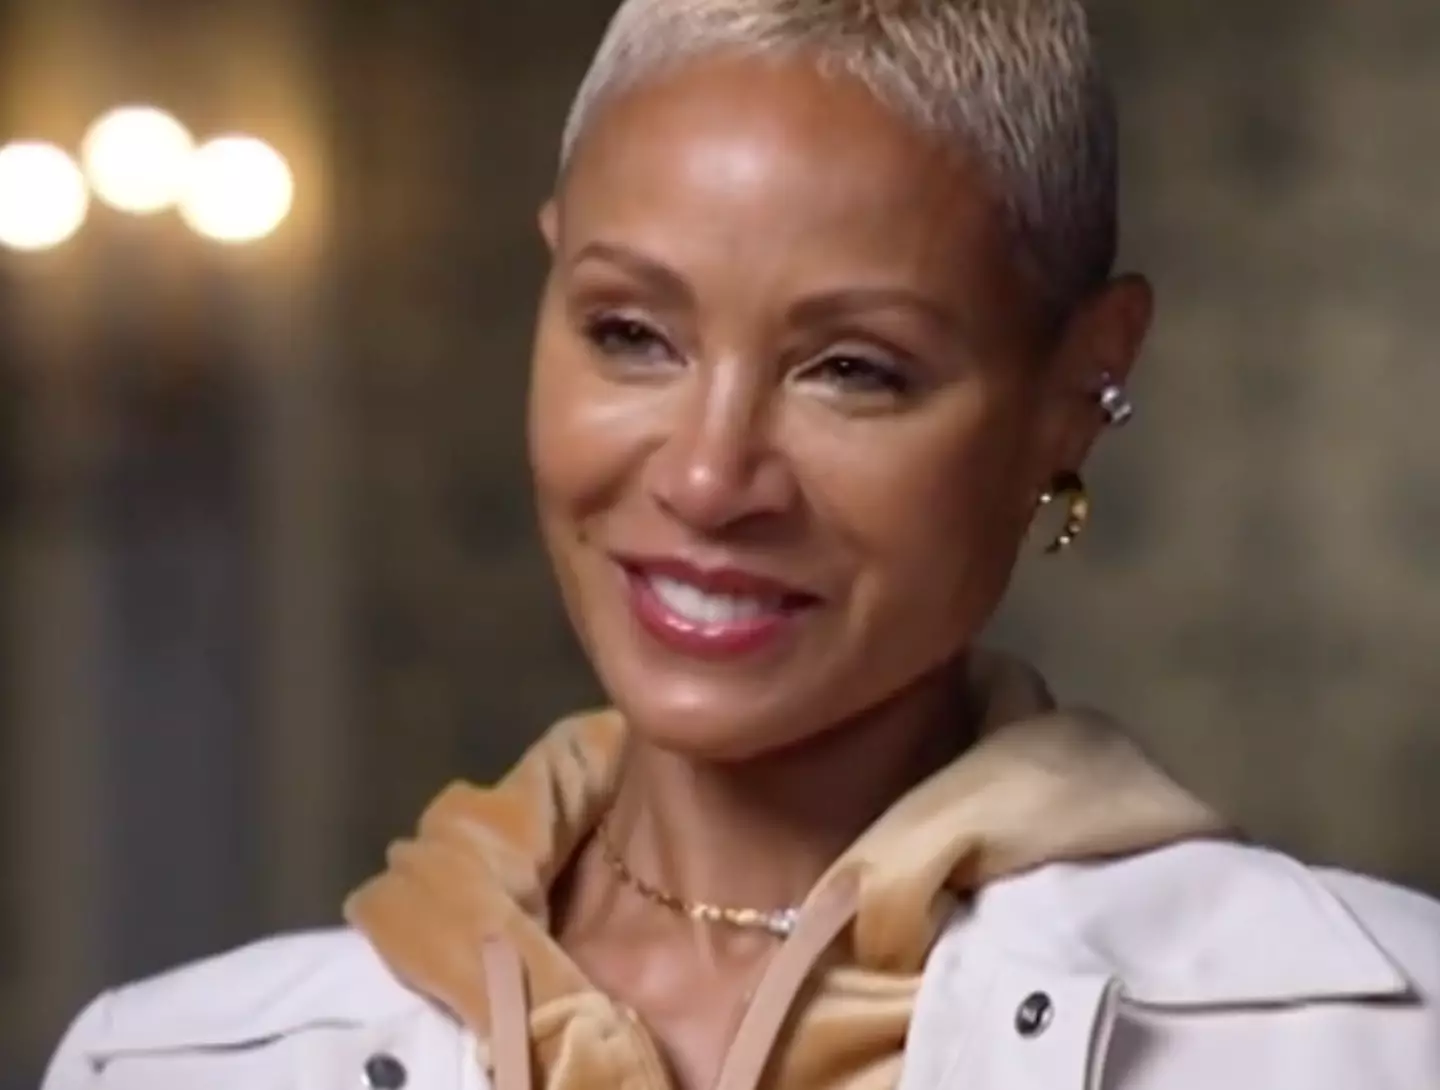 Jada Pinkett Smith now lives in her own home.